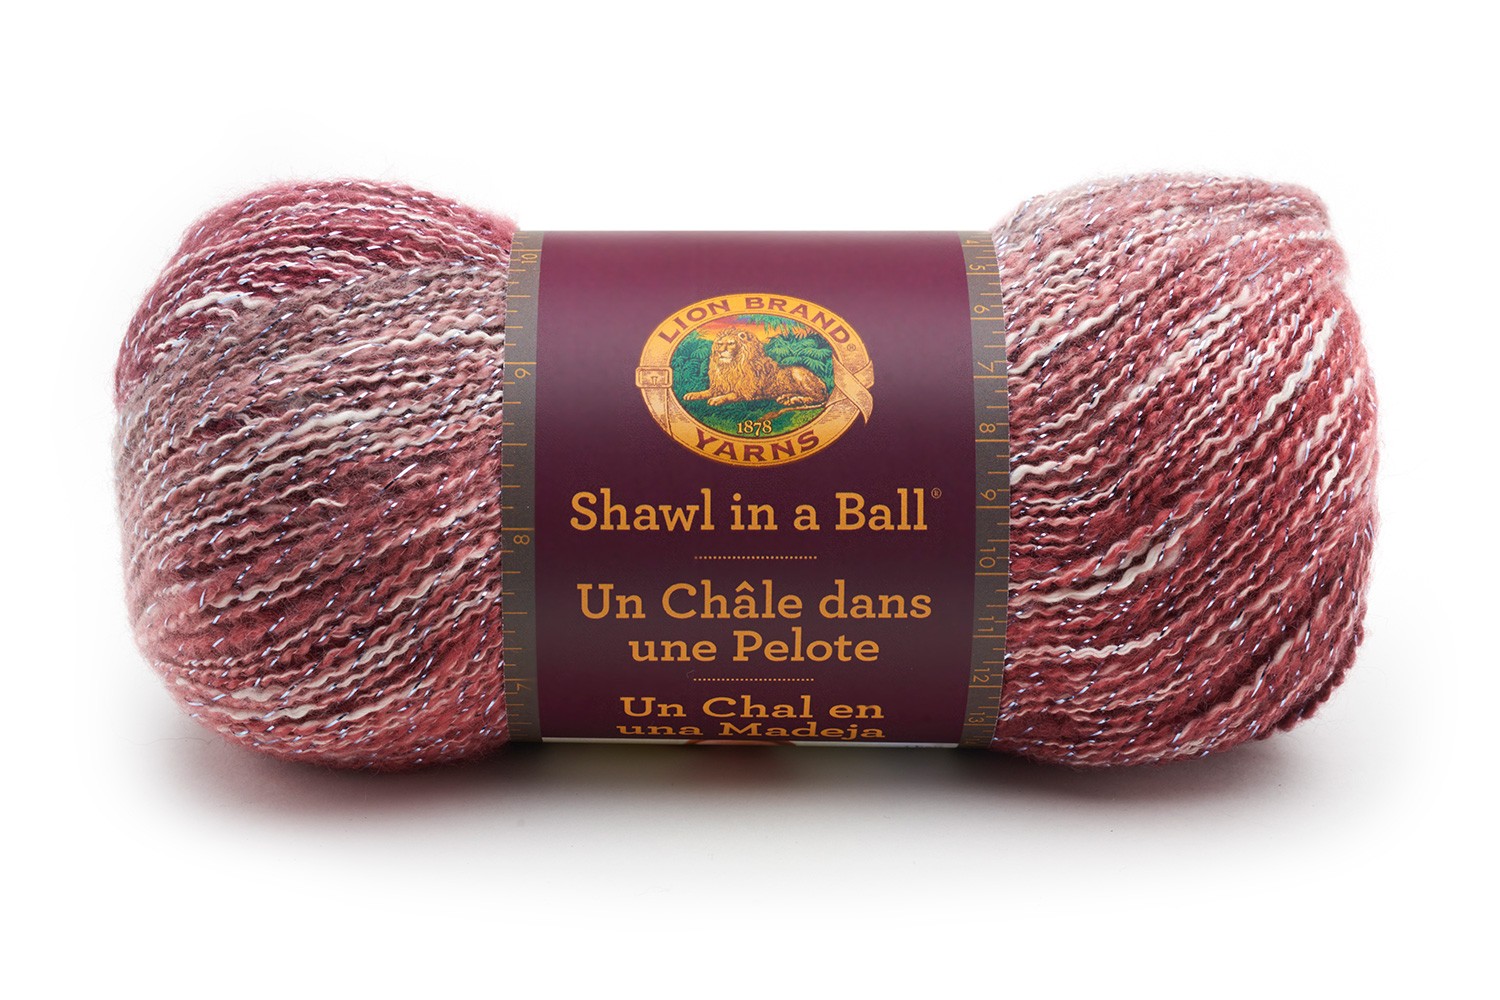 Shawl in a Ball in Moonstone